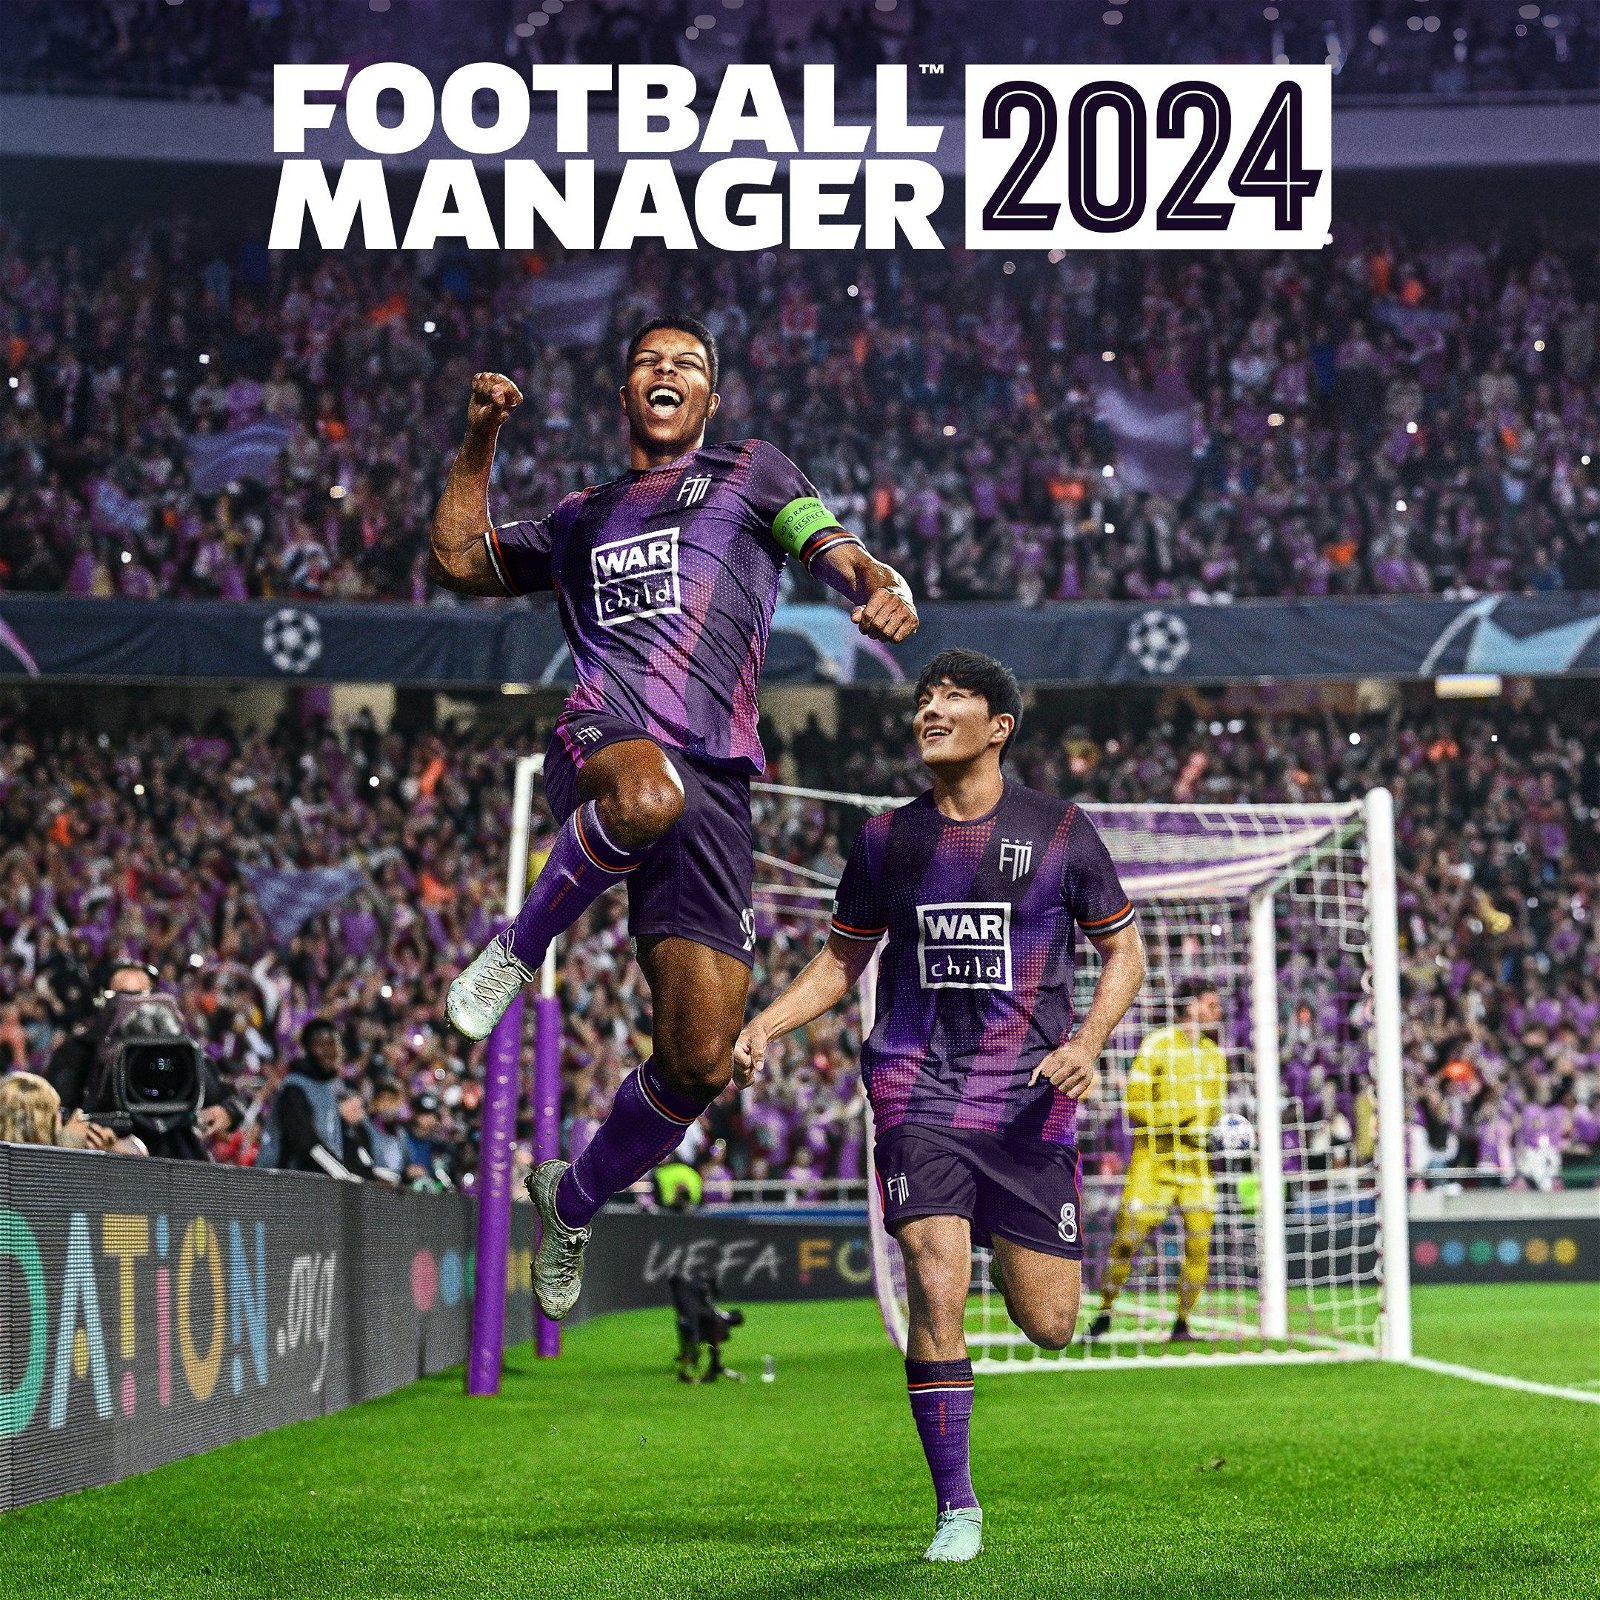 Image of Football Manager 2024